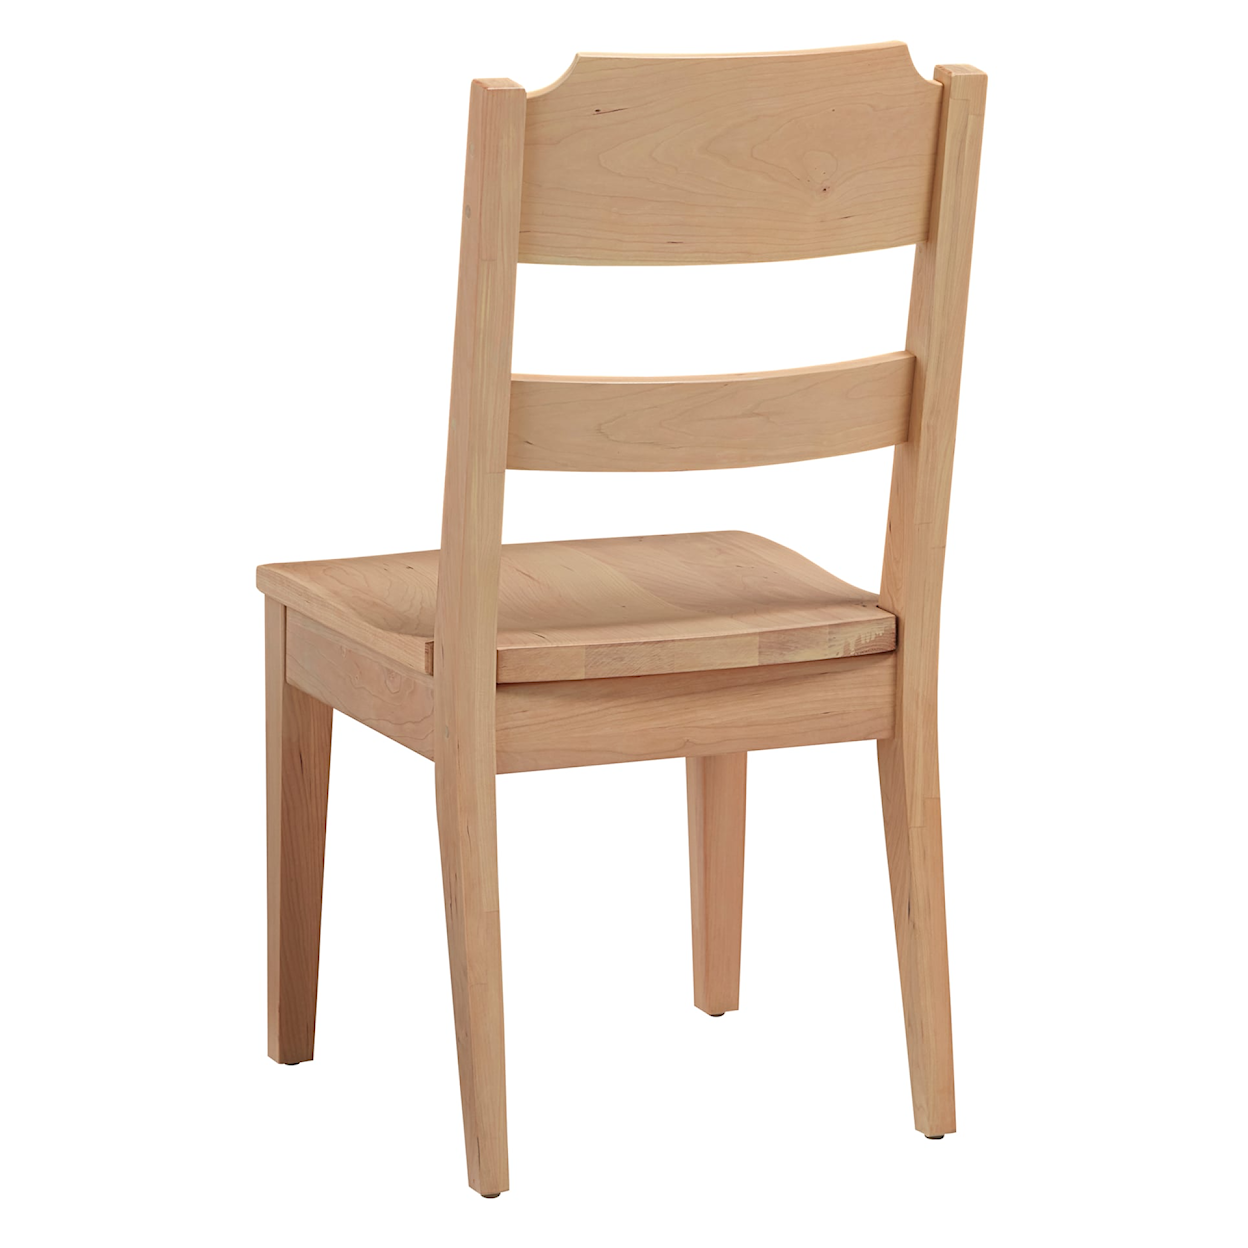 Vaughan Bassett Crafted Cherry - Bleached Ladderback Side Chair